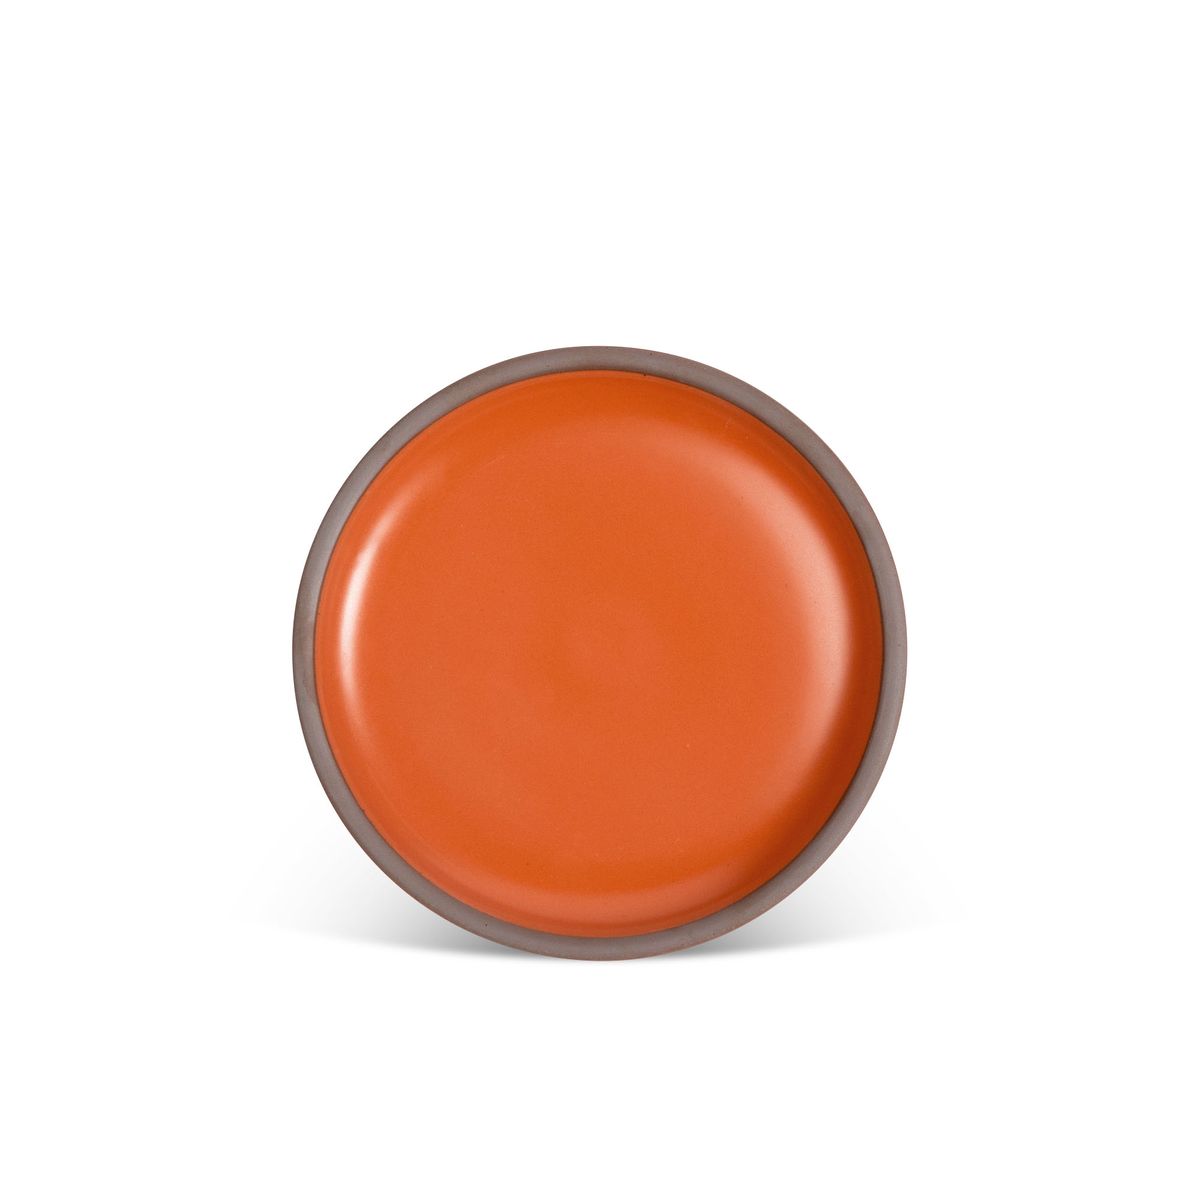 A medium sized ceramic plate in a bold orange color featuring iron speckles and an unglazed rim.